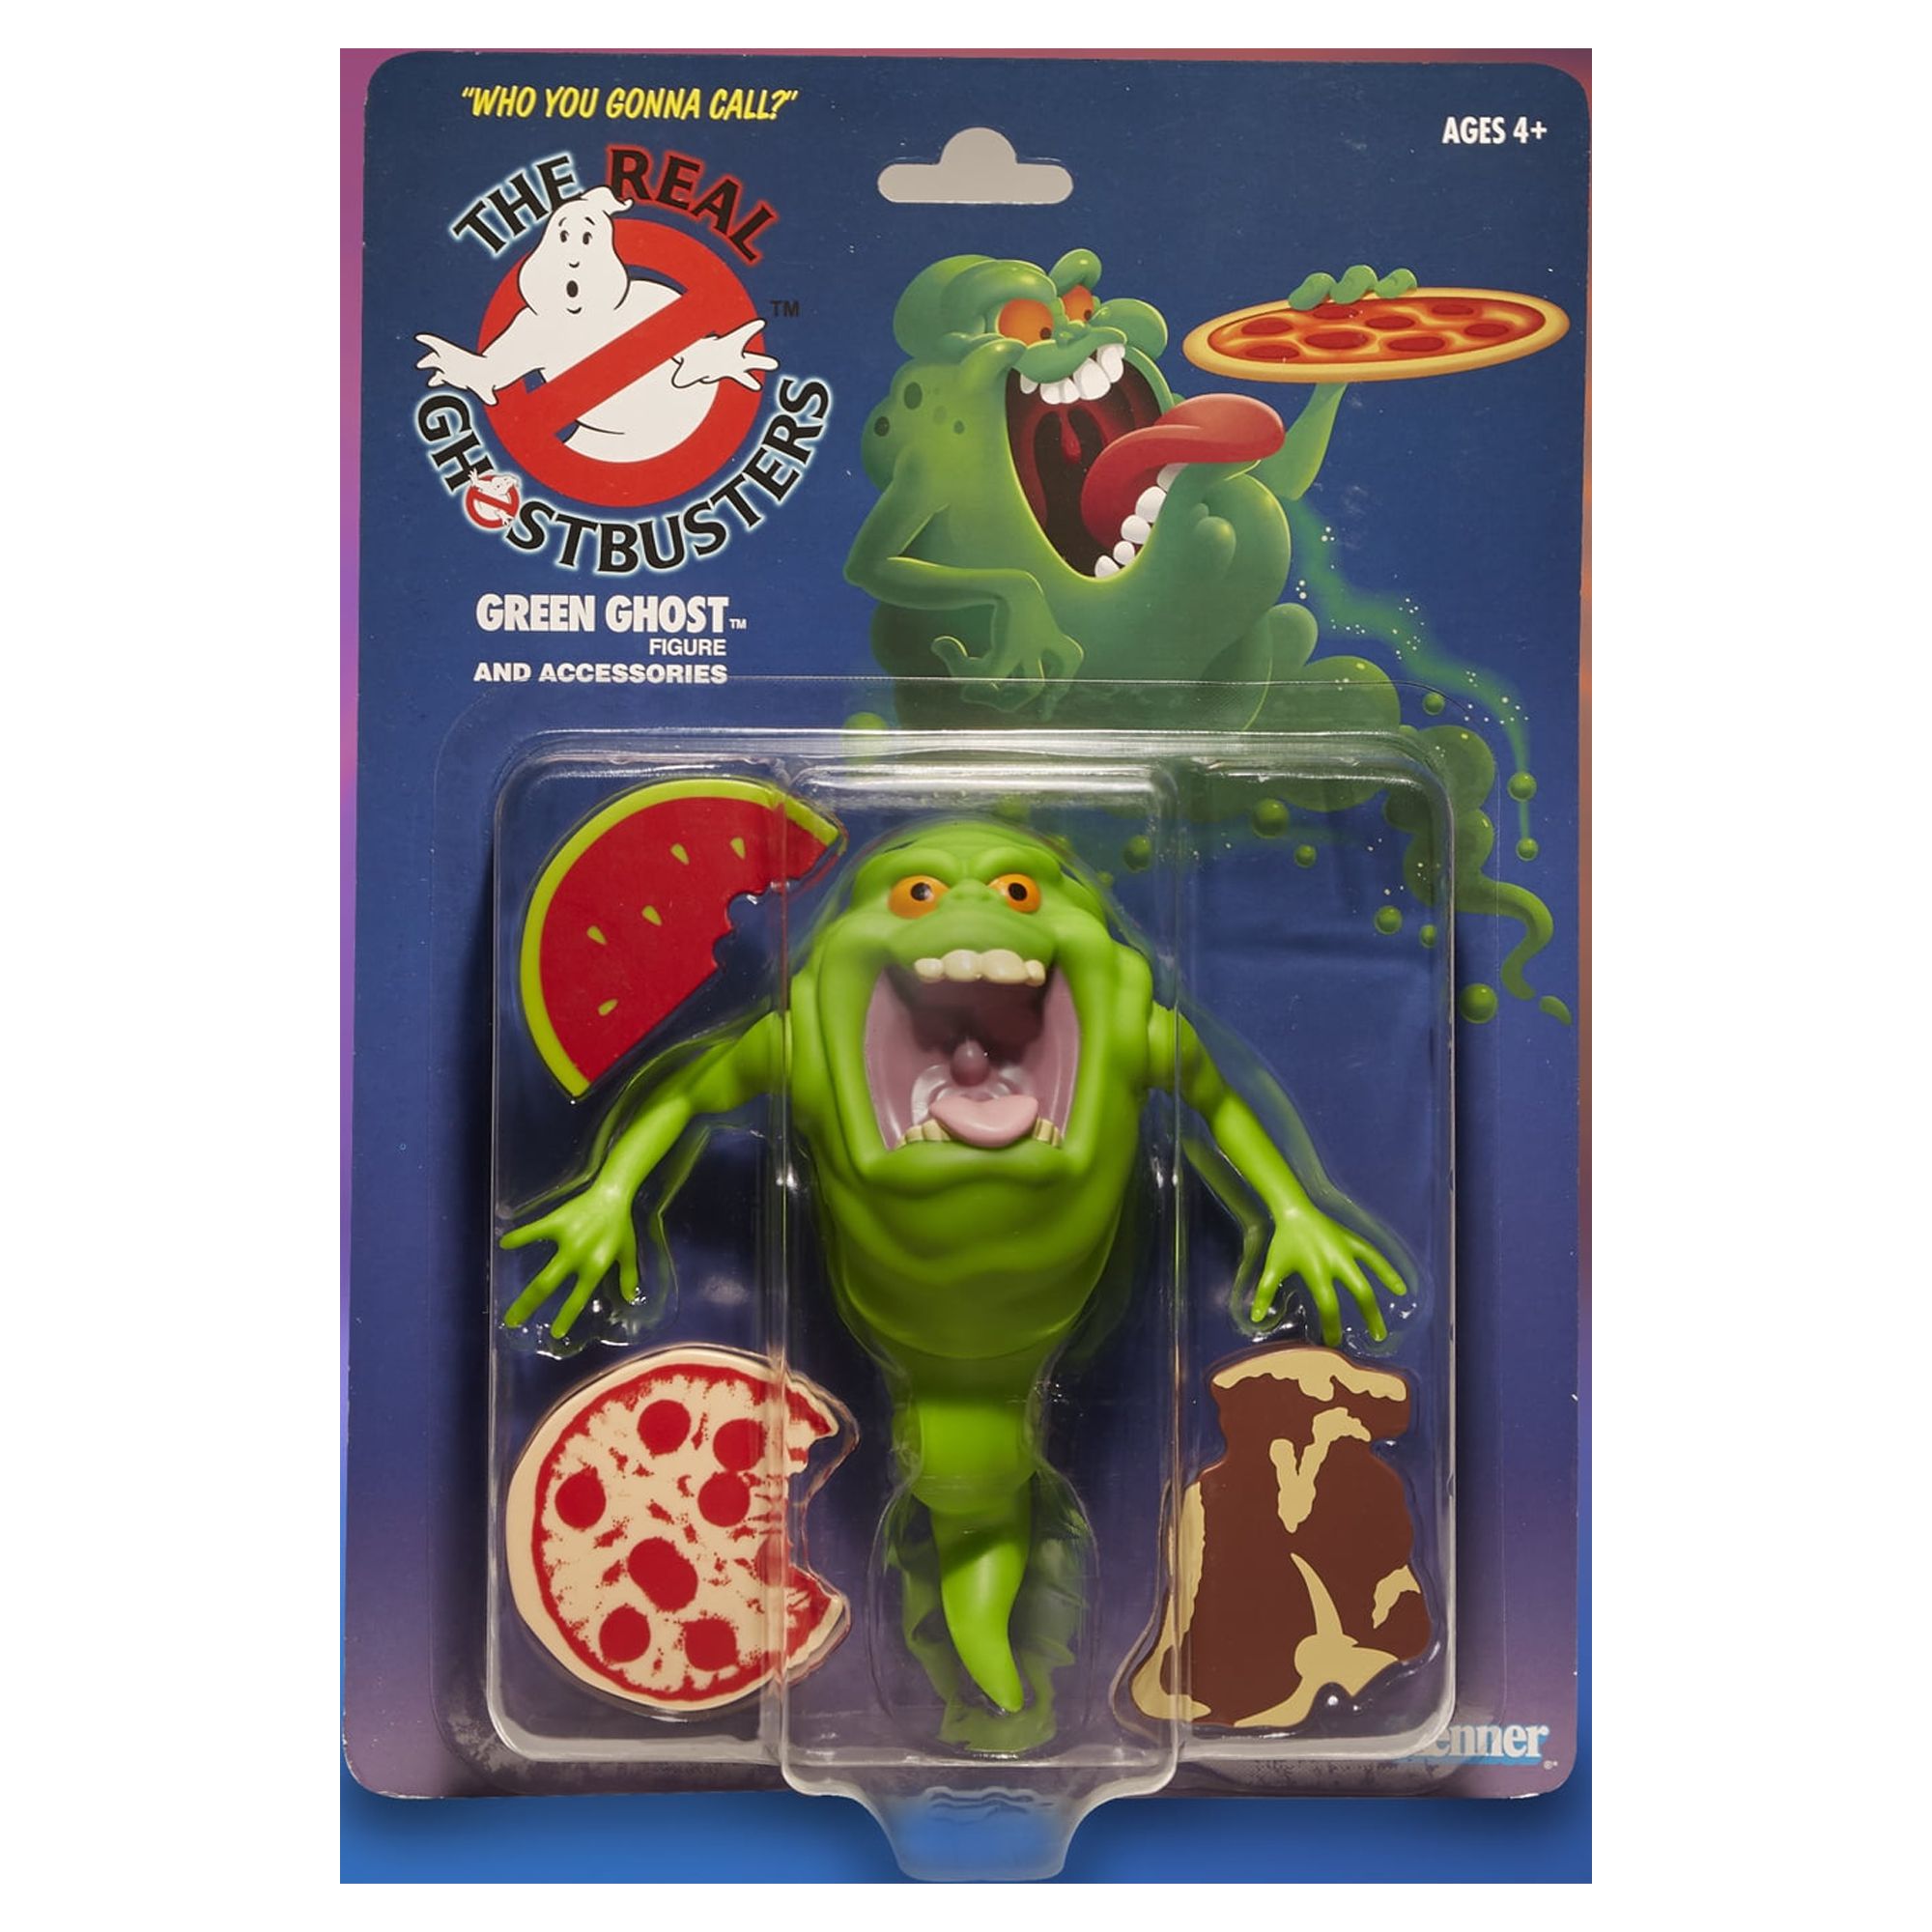 Ghostbusters Kenner Classics Green Ghost Slimer Retro Action Figure - image 3 of 5